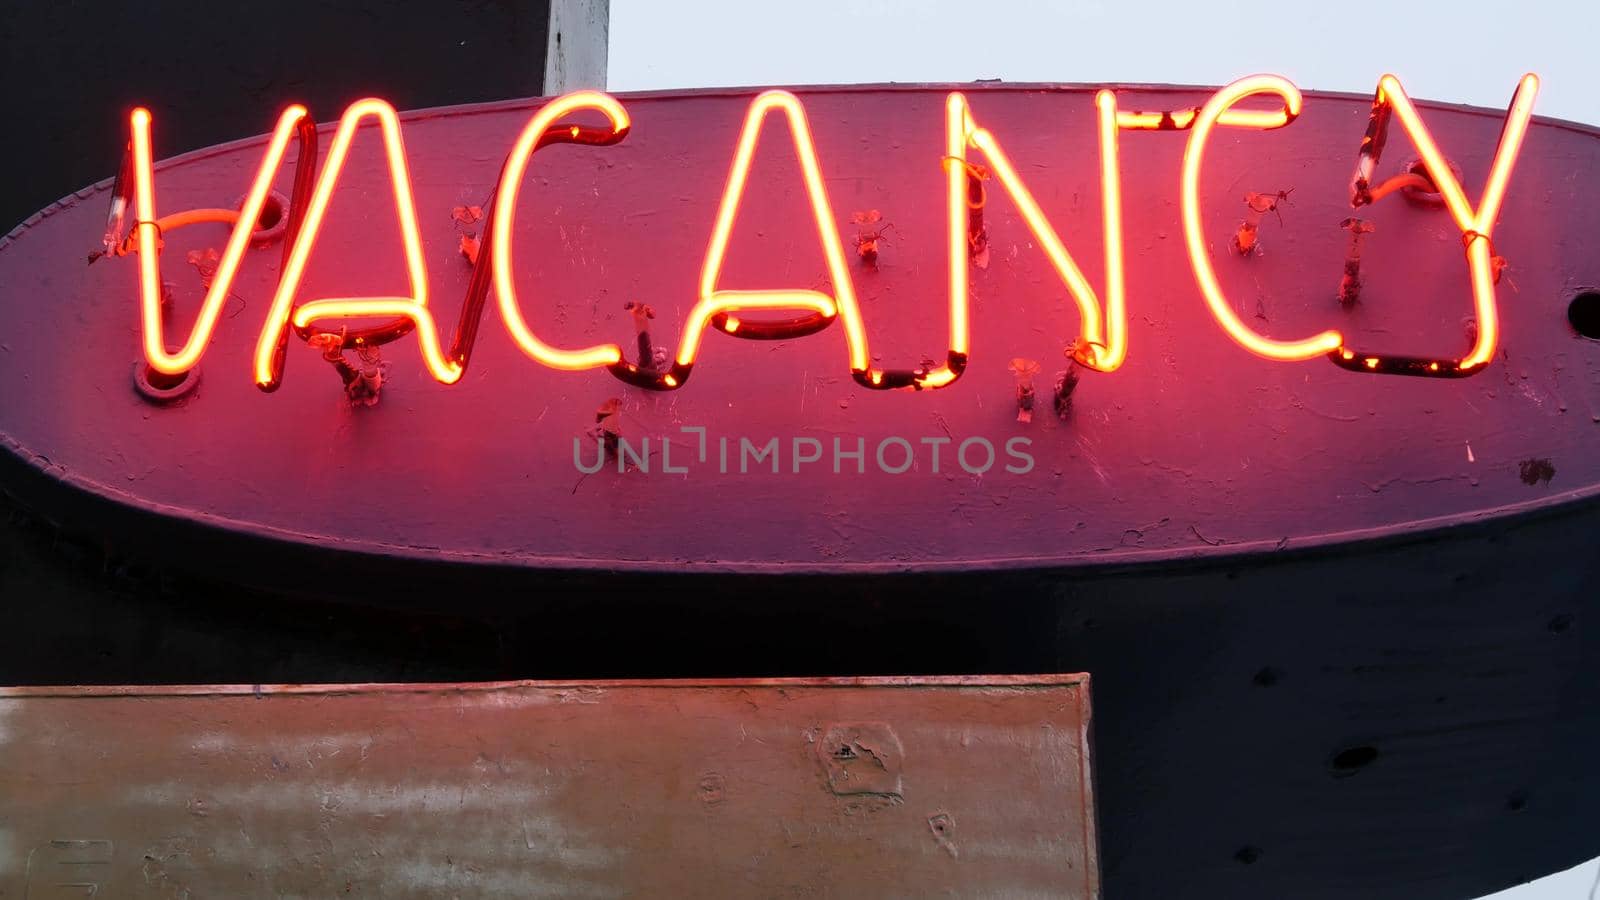 Red neon sign Vacancy glowing, motel or hotel on road in California USA. Illuminated text about lodging during road trip. Tourism or traveling in America.